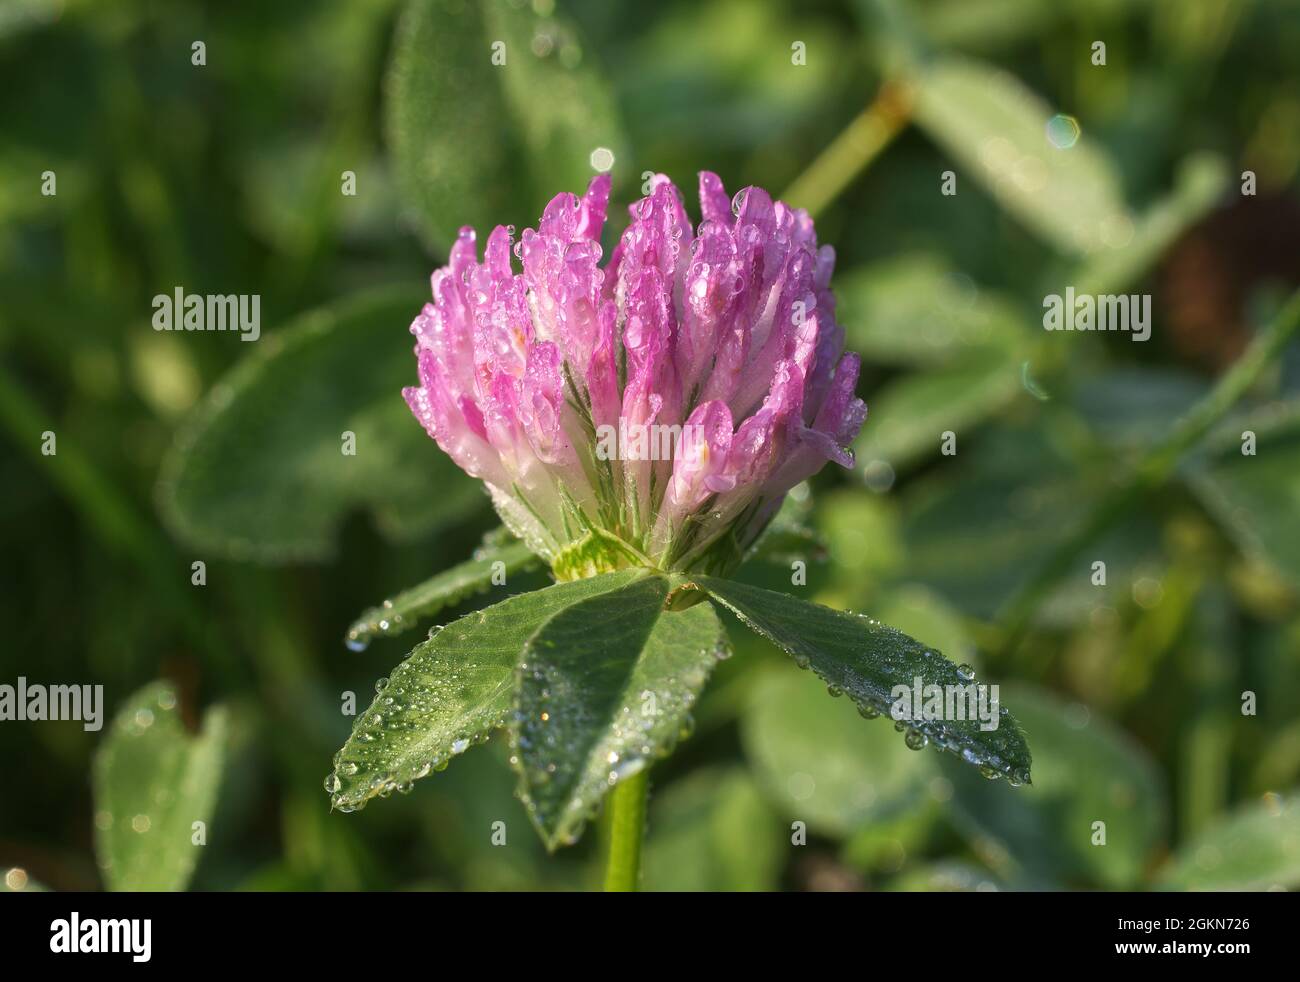 Meadow clover or Red clover, Trifolium pratense, close-up of this herbaceous species from the clover family with drops of morning dew on the flower Stock Photo